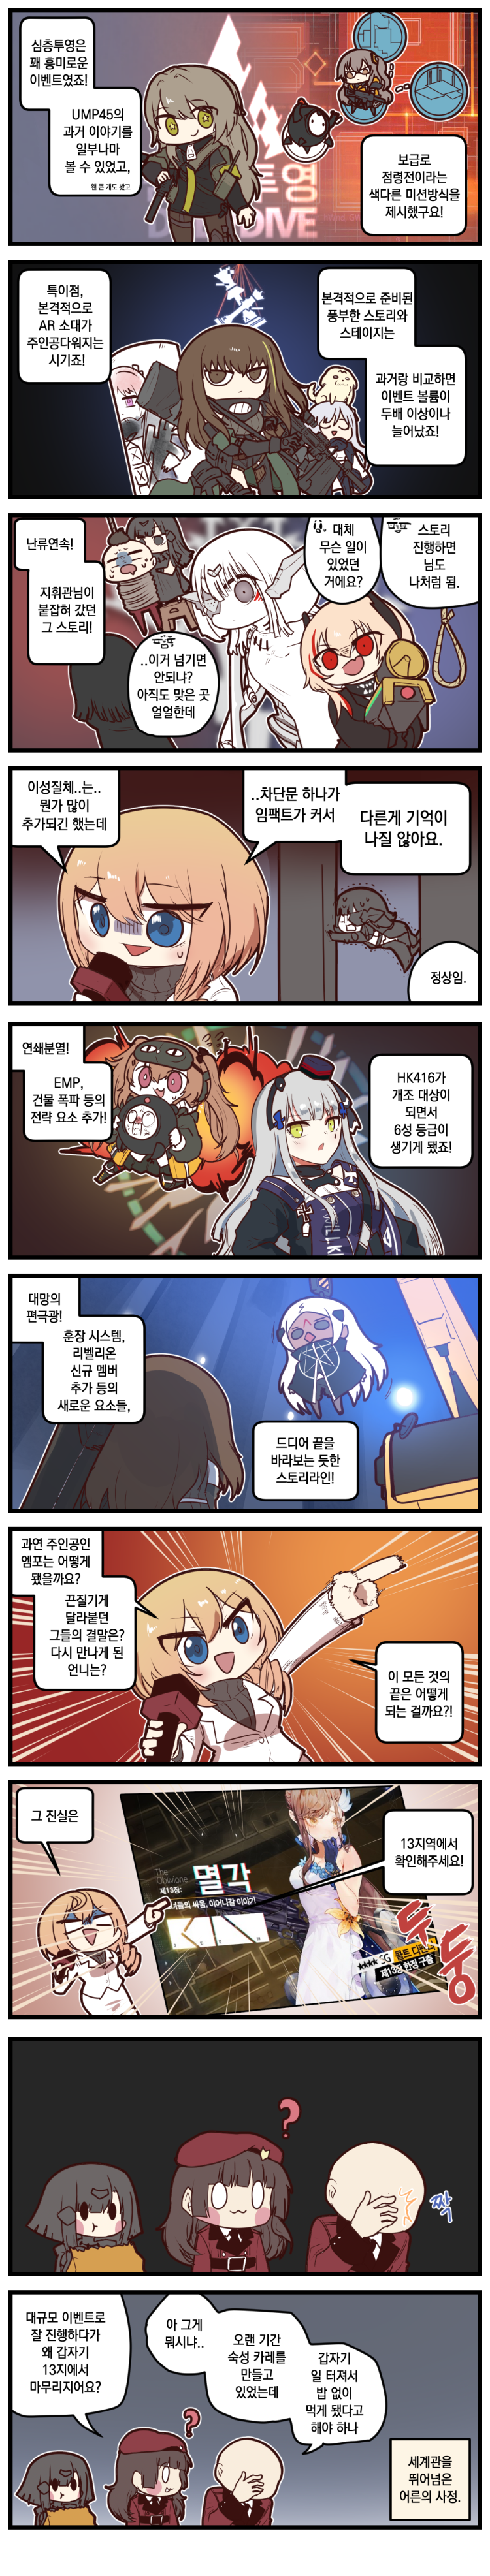 hk416, ump45, ump9, ak-12, m4a1, and 20 more (girls' frontline) drawn by madcore